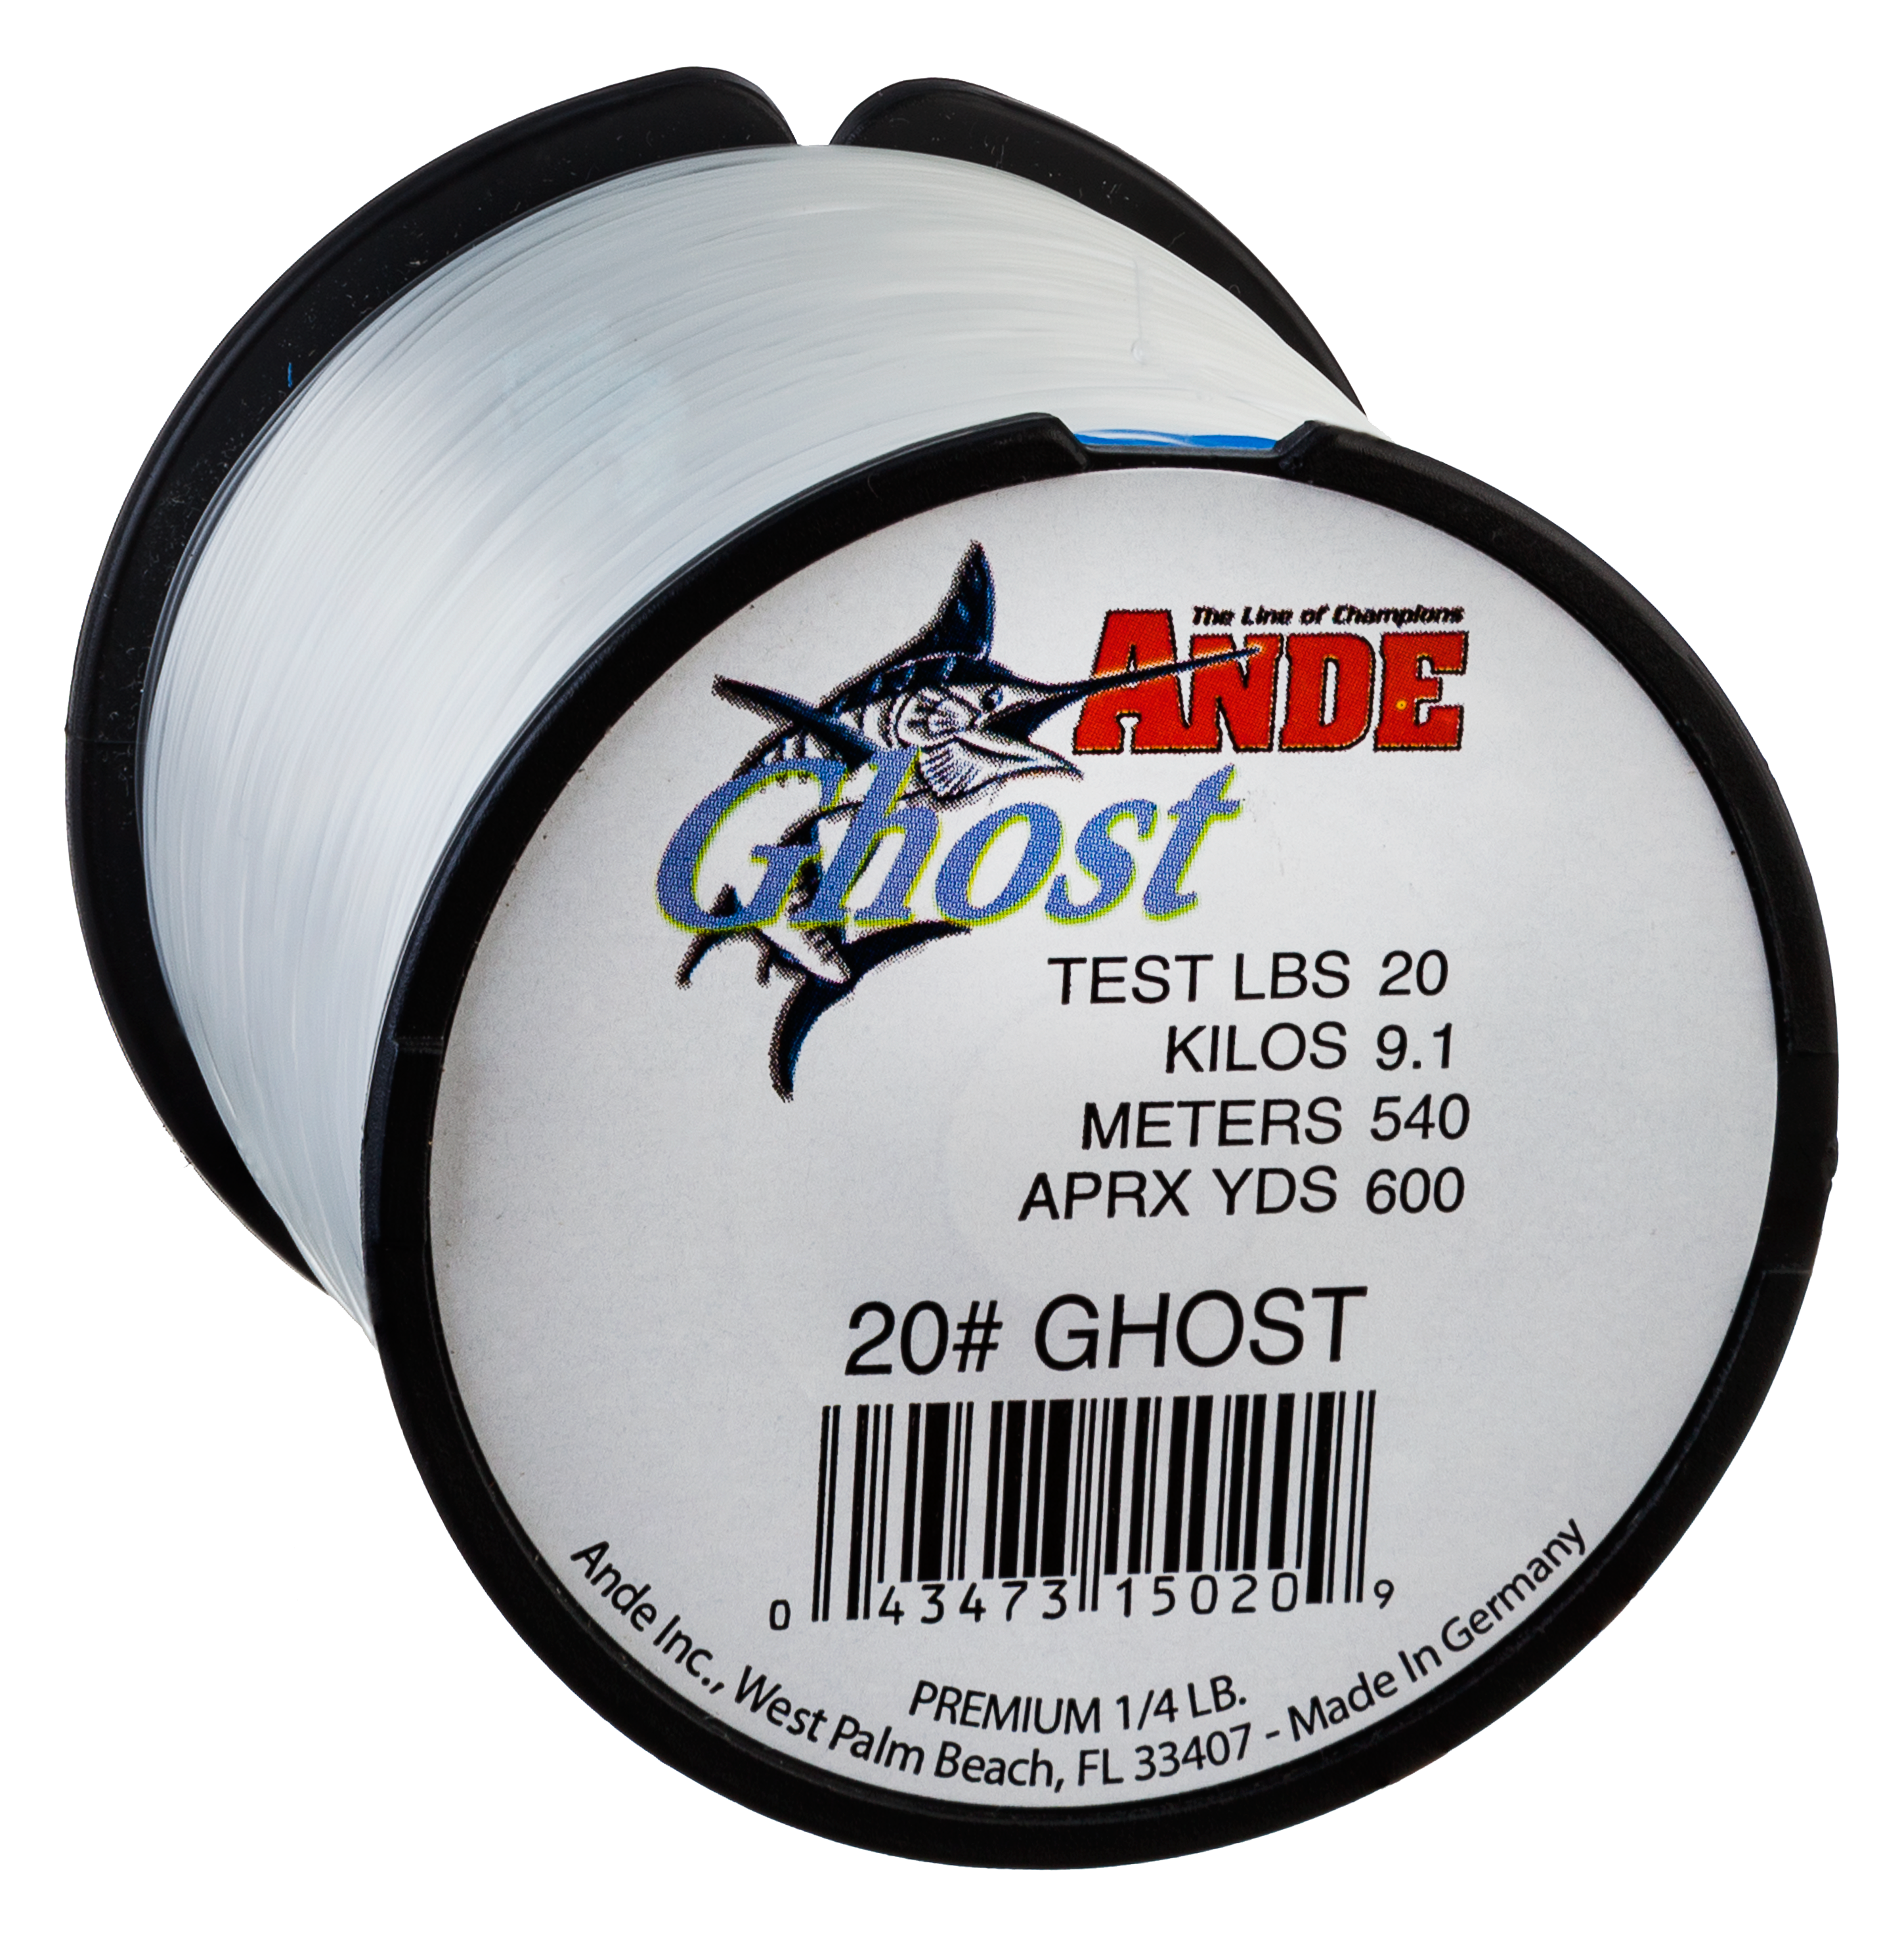 Ande Back Country Monofilament Line - 1/4 lb. Spool